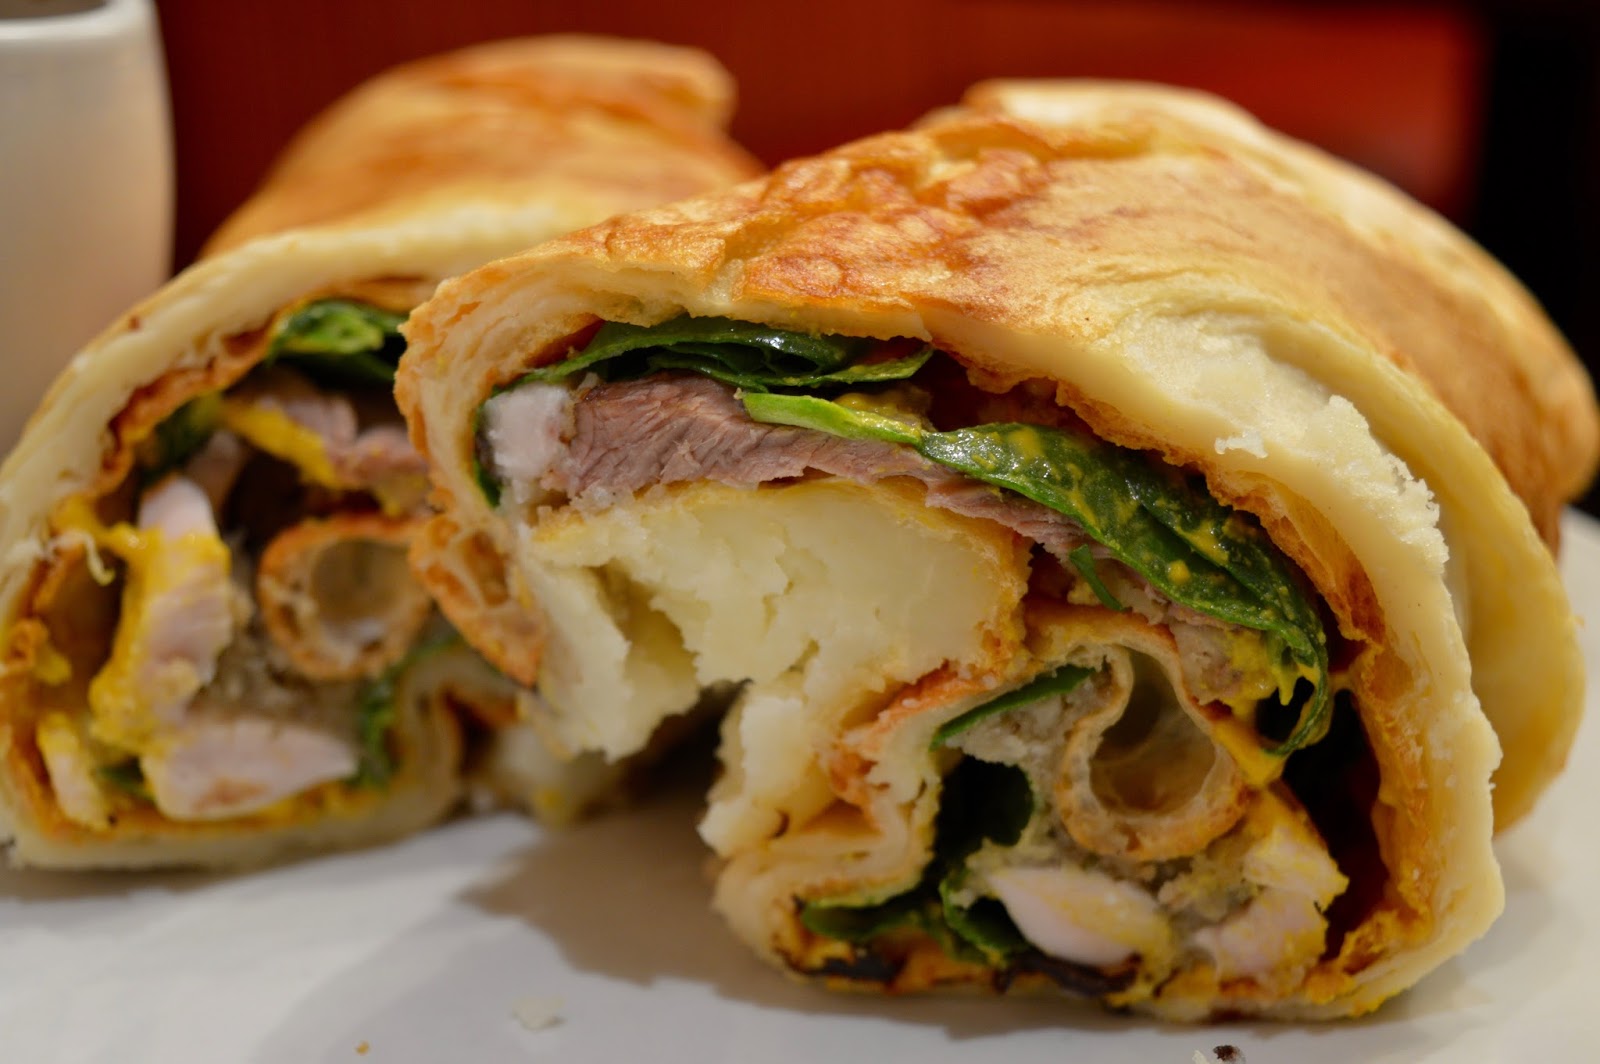 New Yorkshire Pudding Wraps at Toby Carvery - are worth the hype? North East Family Fun